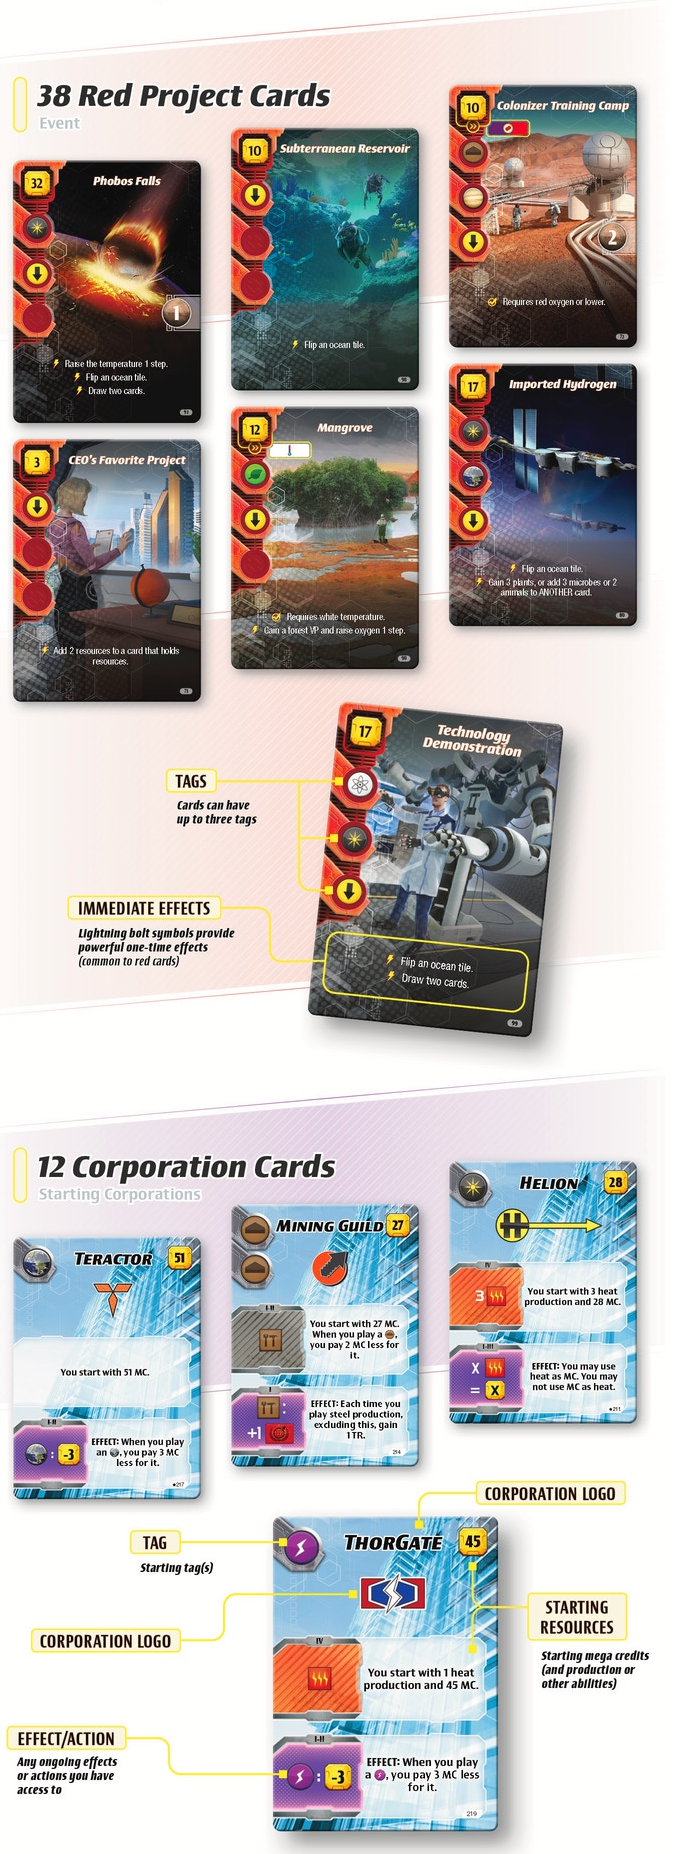 Terraforming Mars: Ares Expedition Card Game